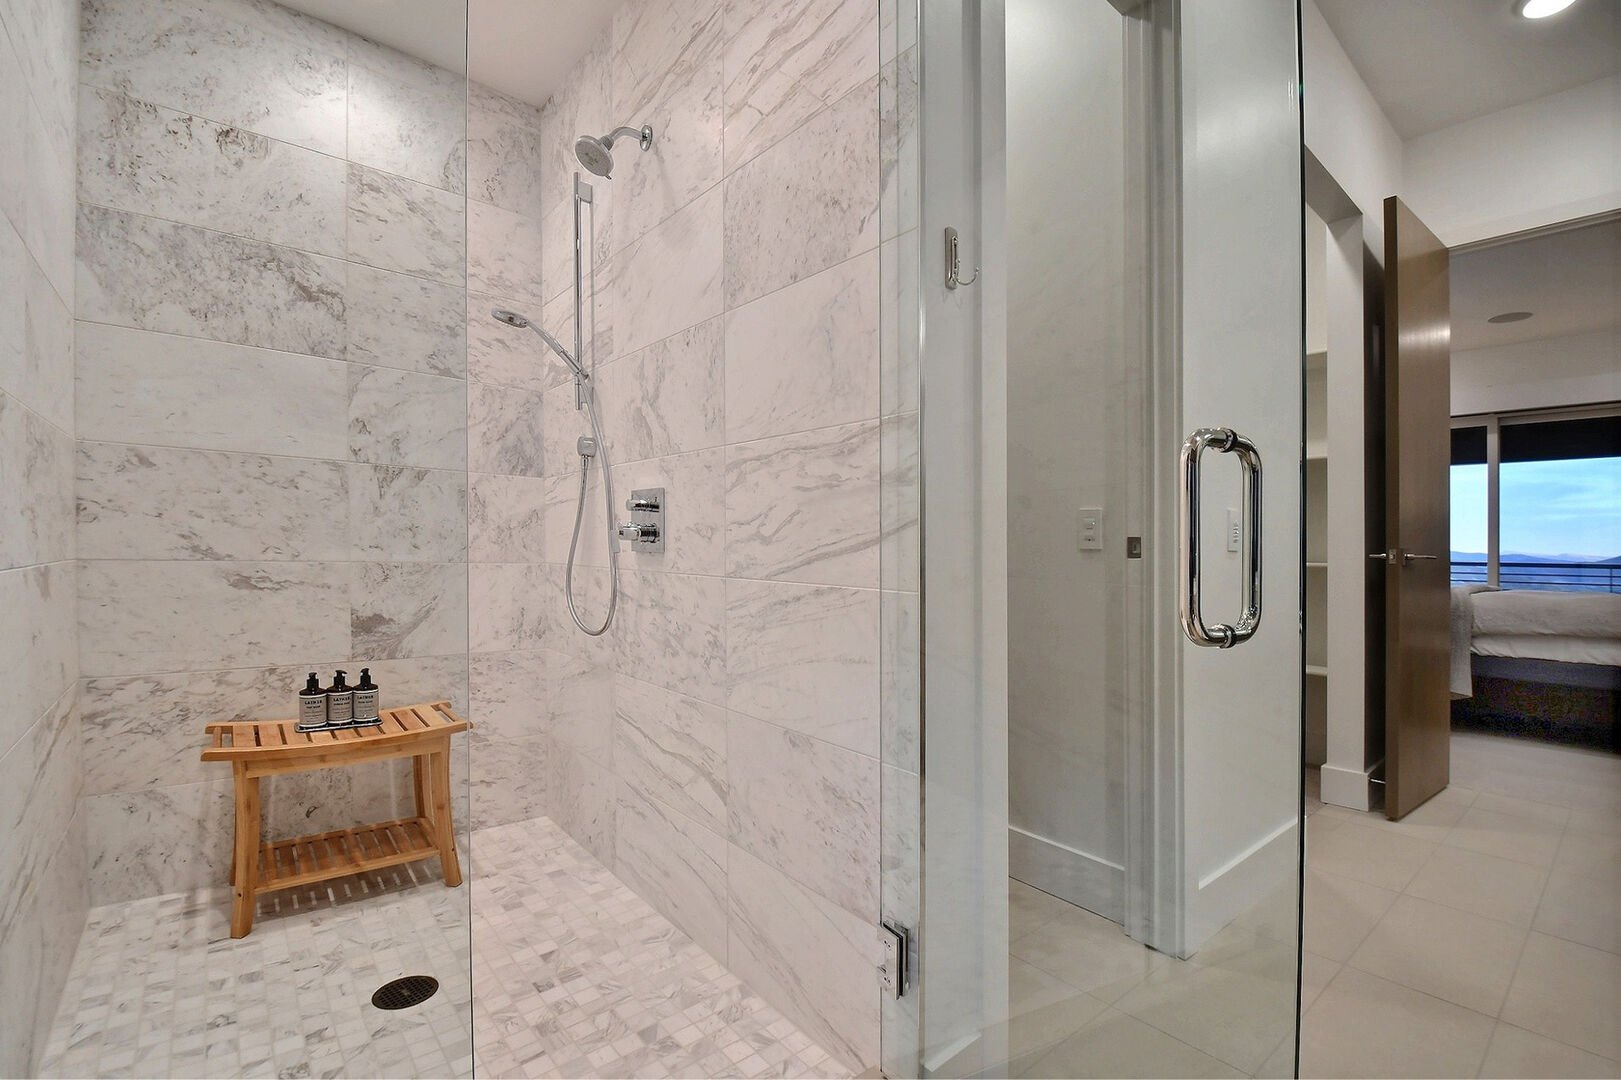 Spacious shower in the master bath.